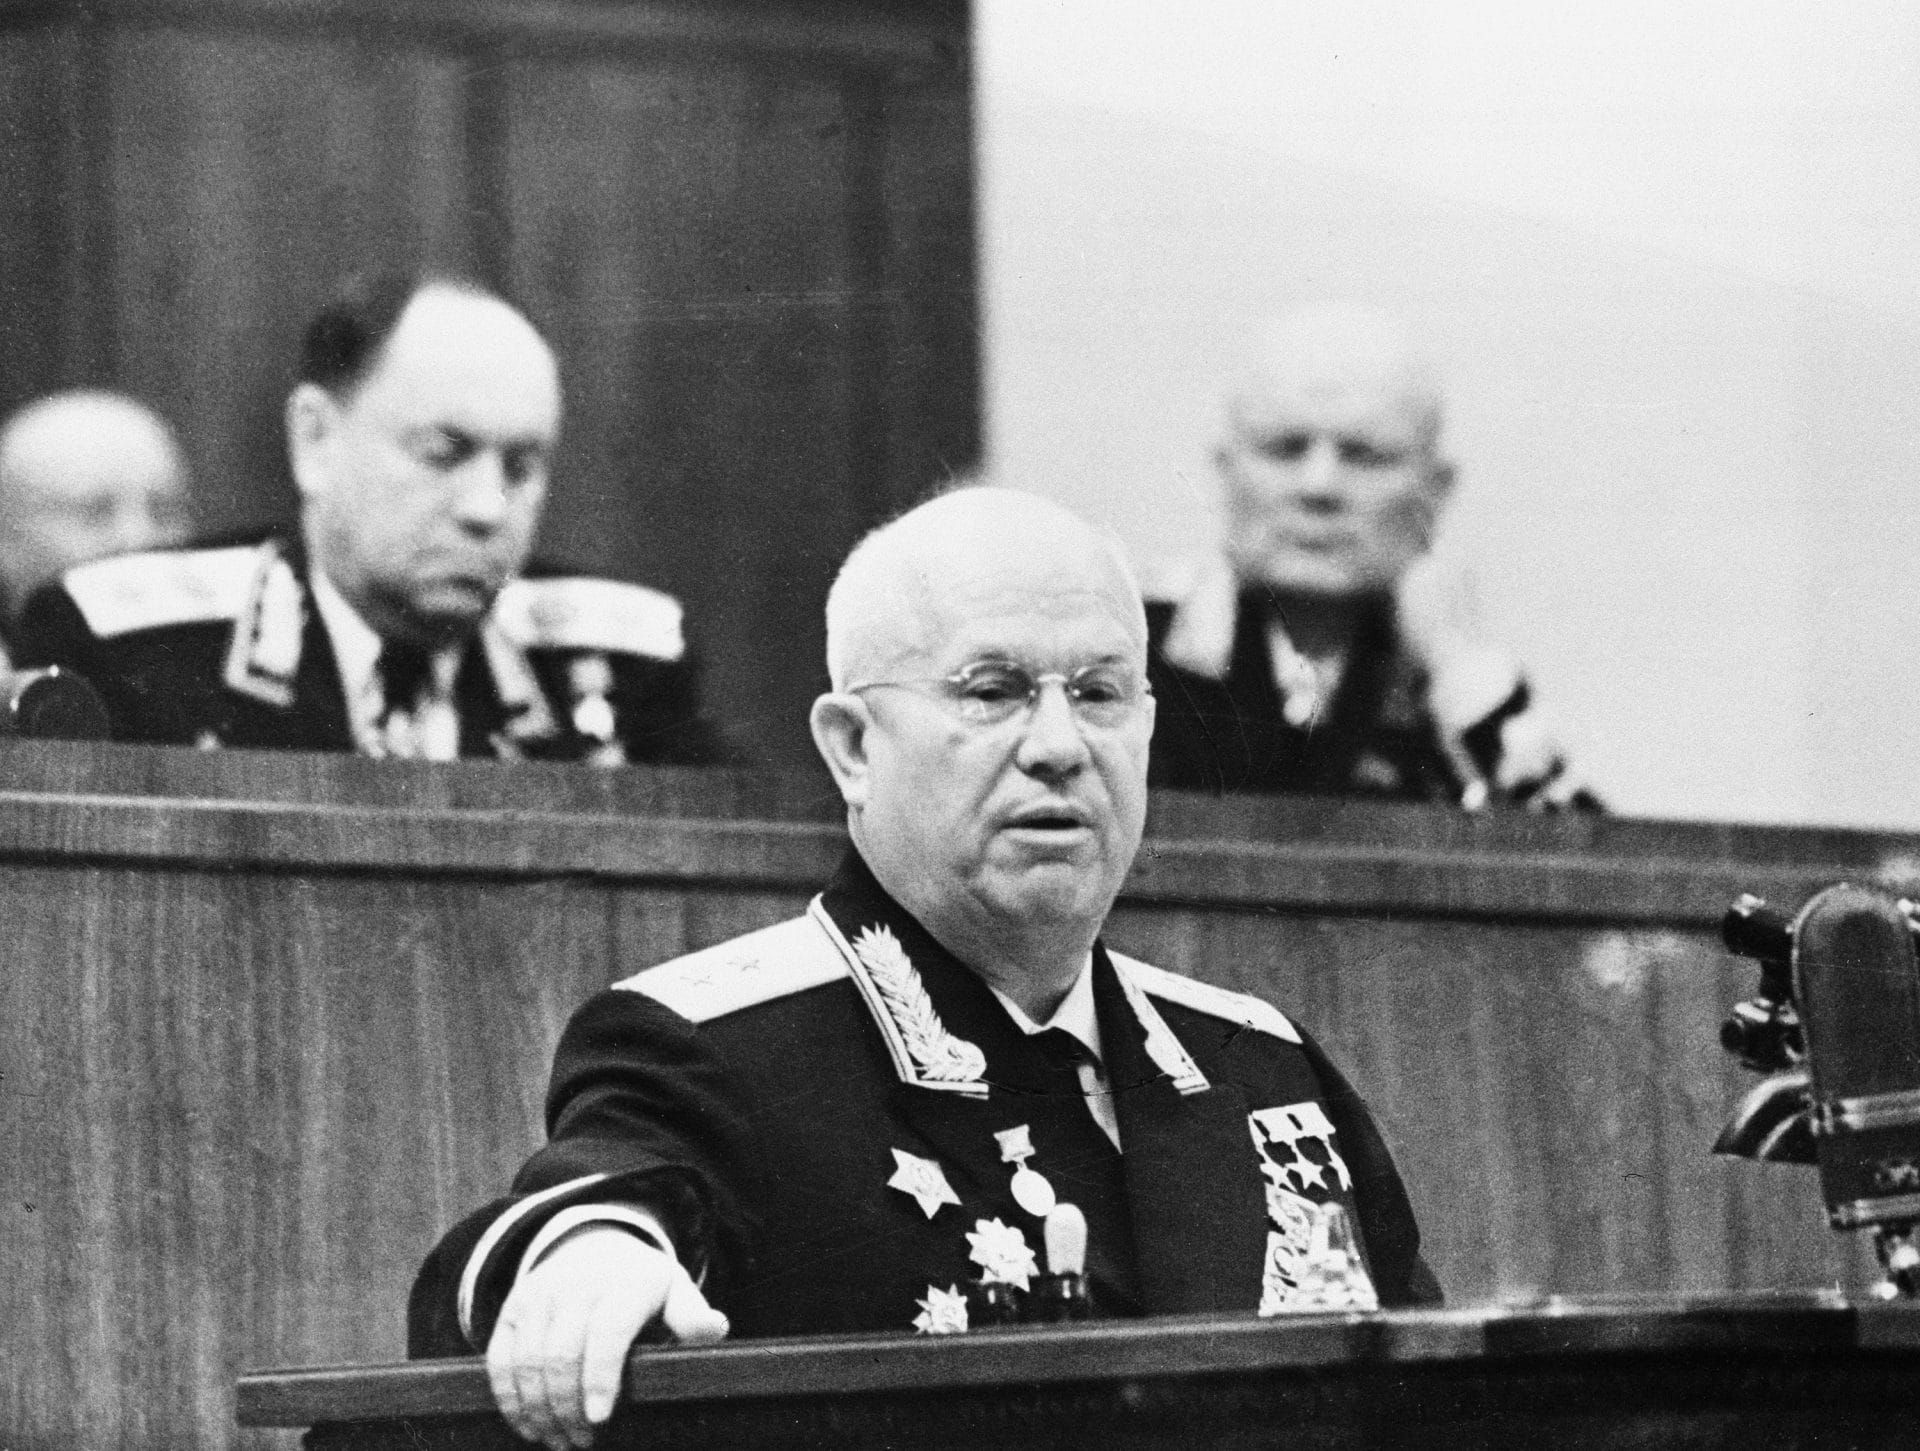 Russian Premier Nikita Khrushchev addresses a cheering rally in Moscow on June 21, 1961.  Khrushchev threatened to sign a peace treaty with East Germany before the end of the year and said Russia would resume nuclear tests as soon as the United States started testing again. (AP Photo)